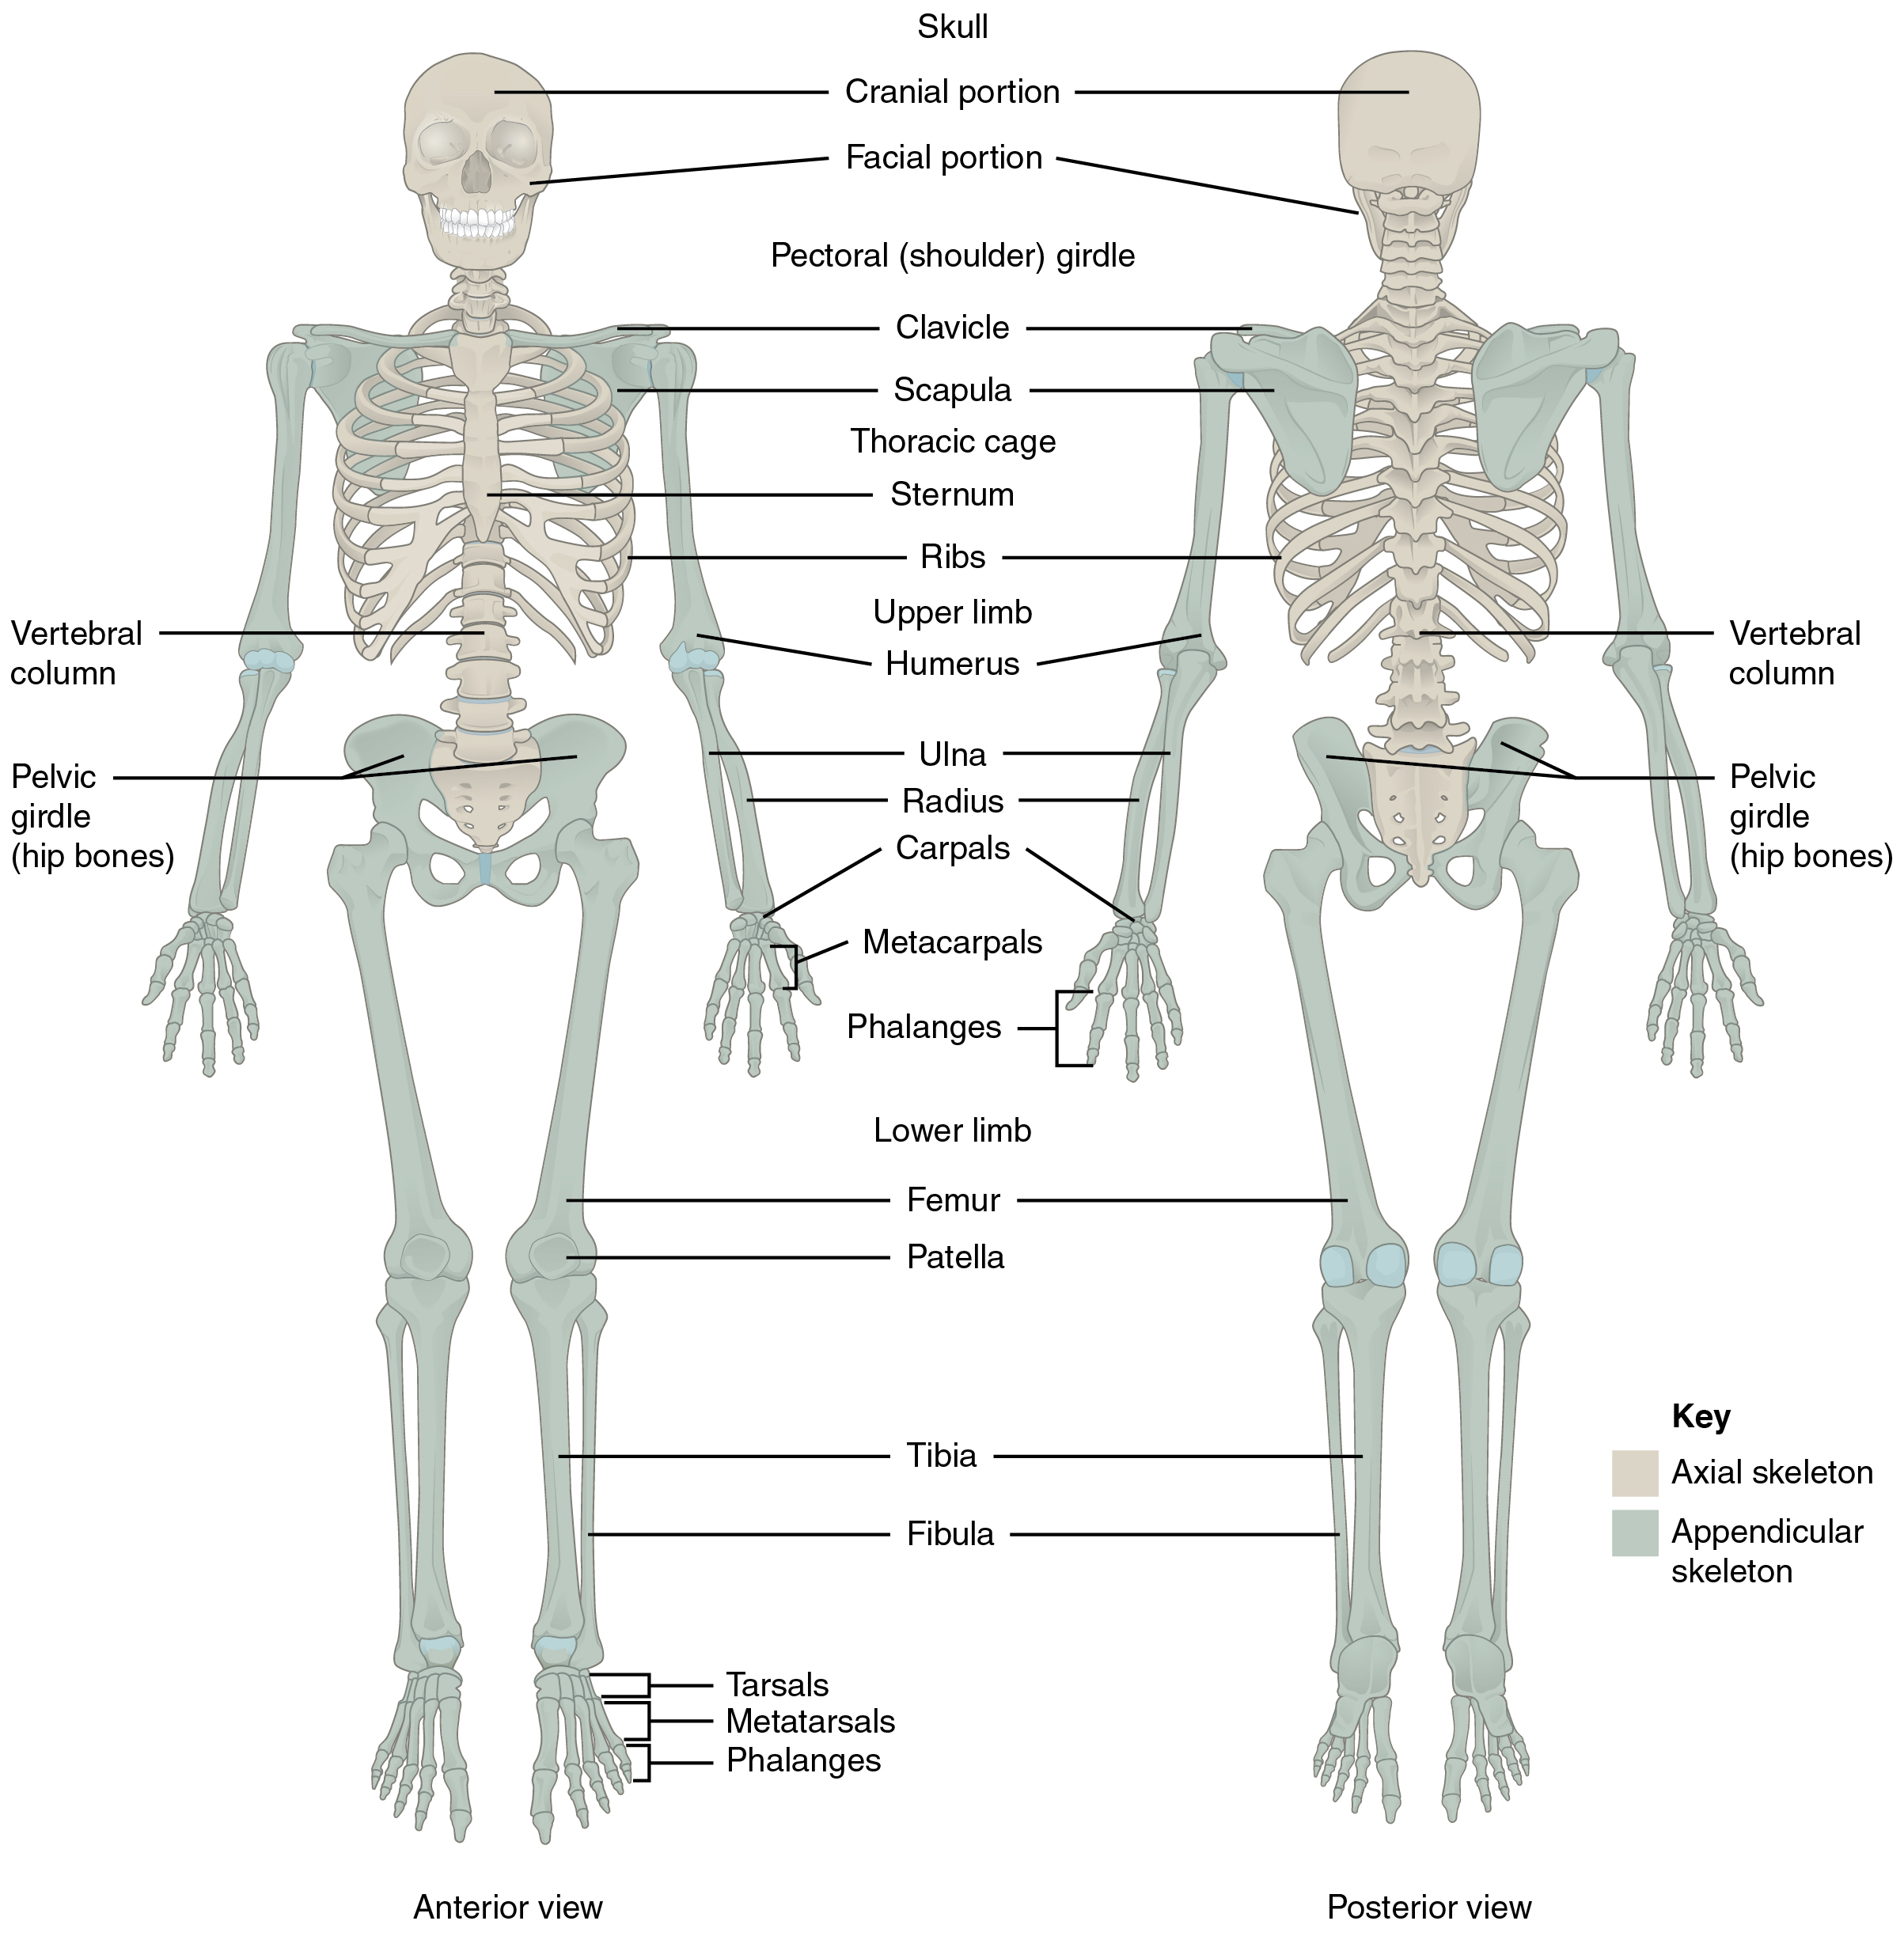 Human skeleton divisions in anterior and posterior views - described in text